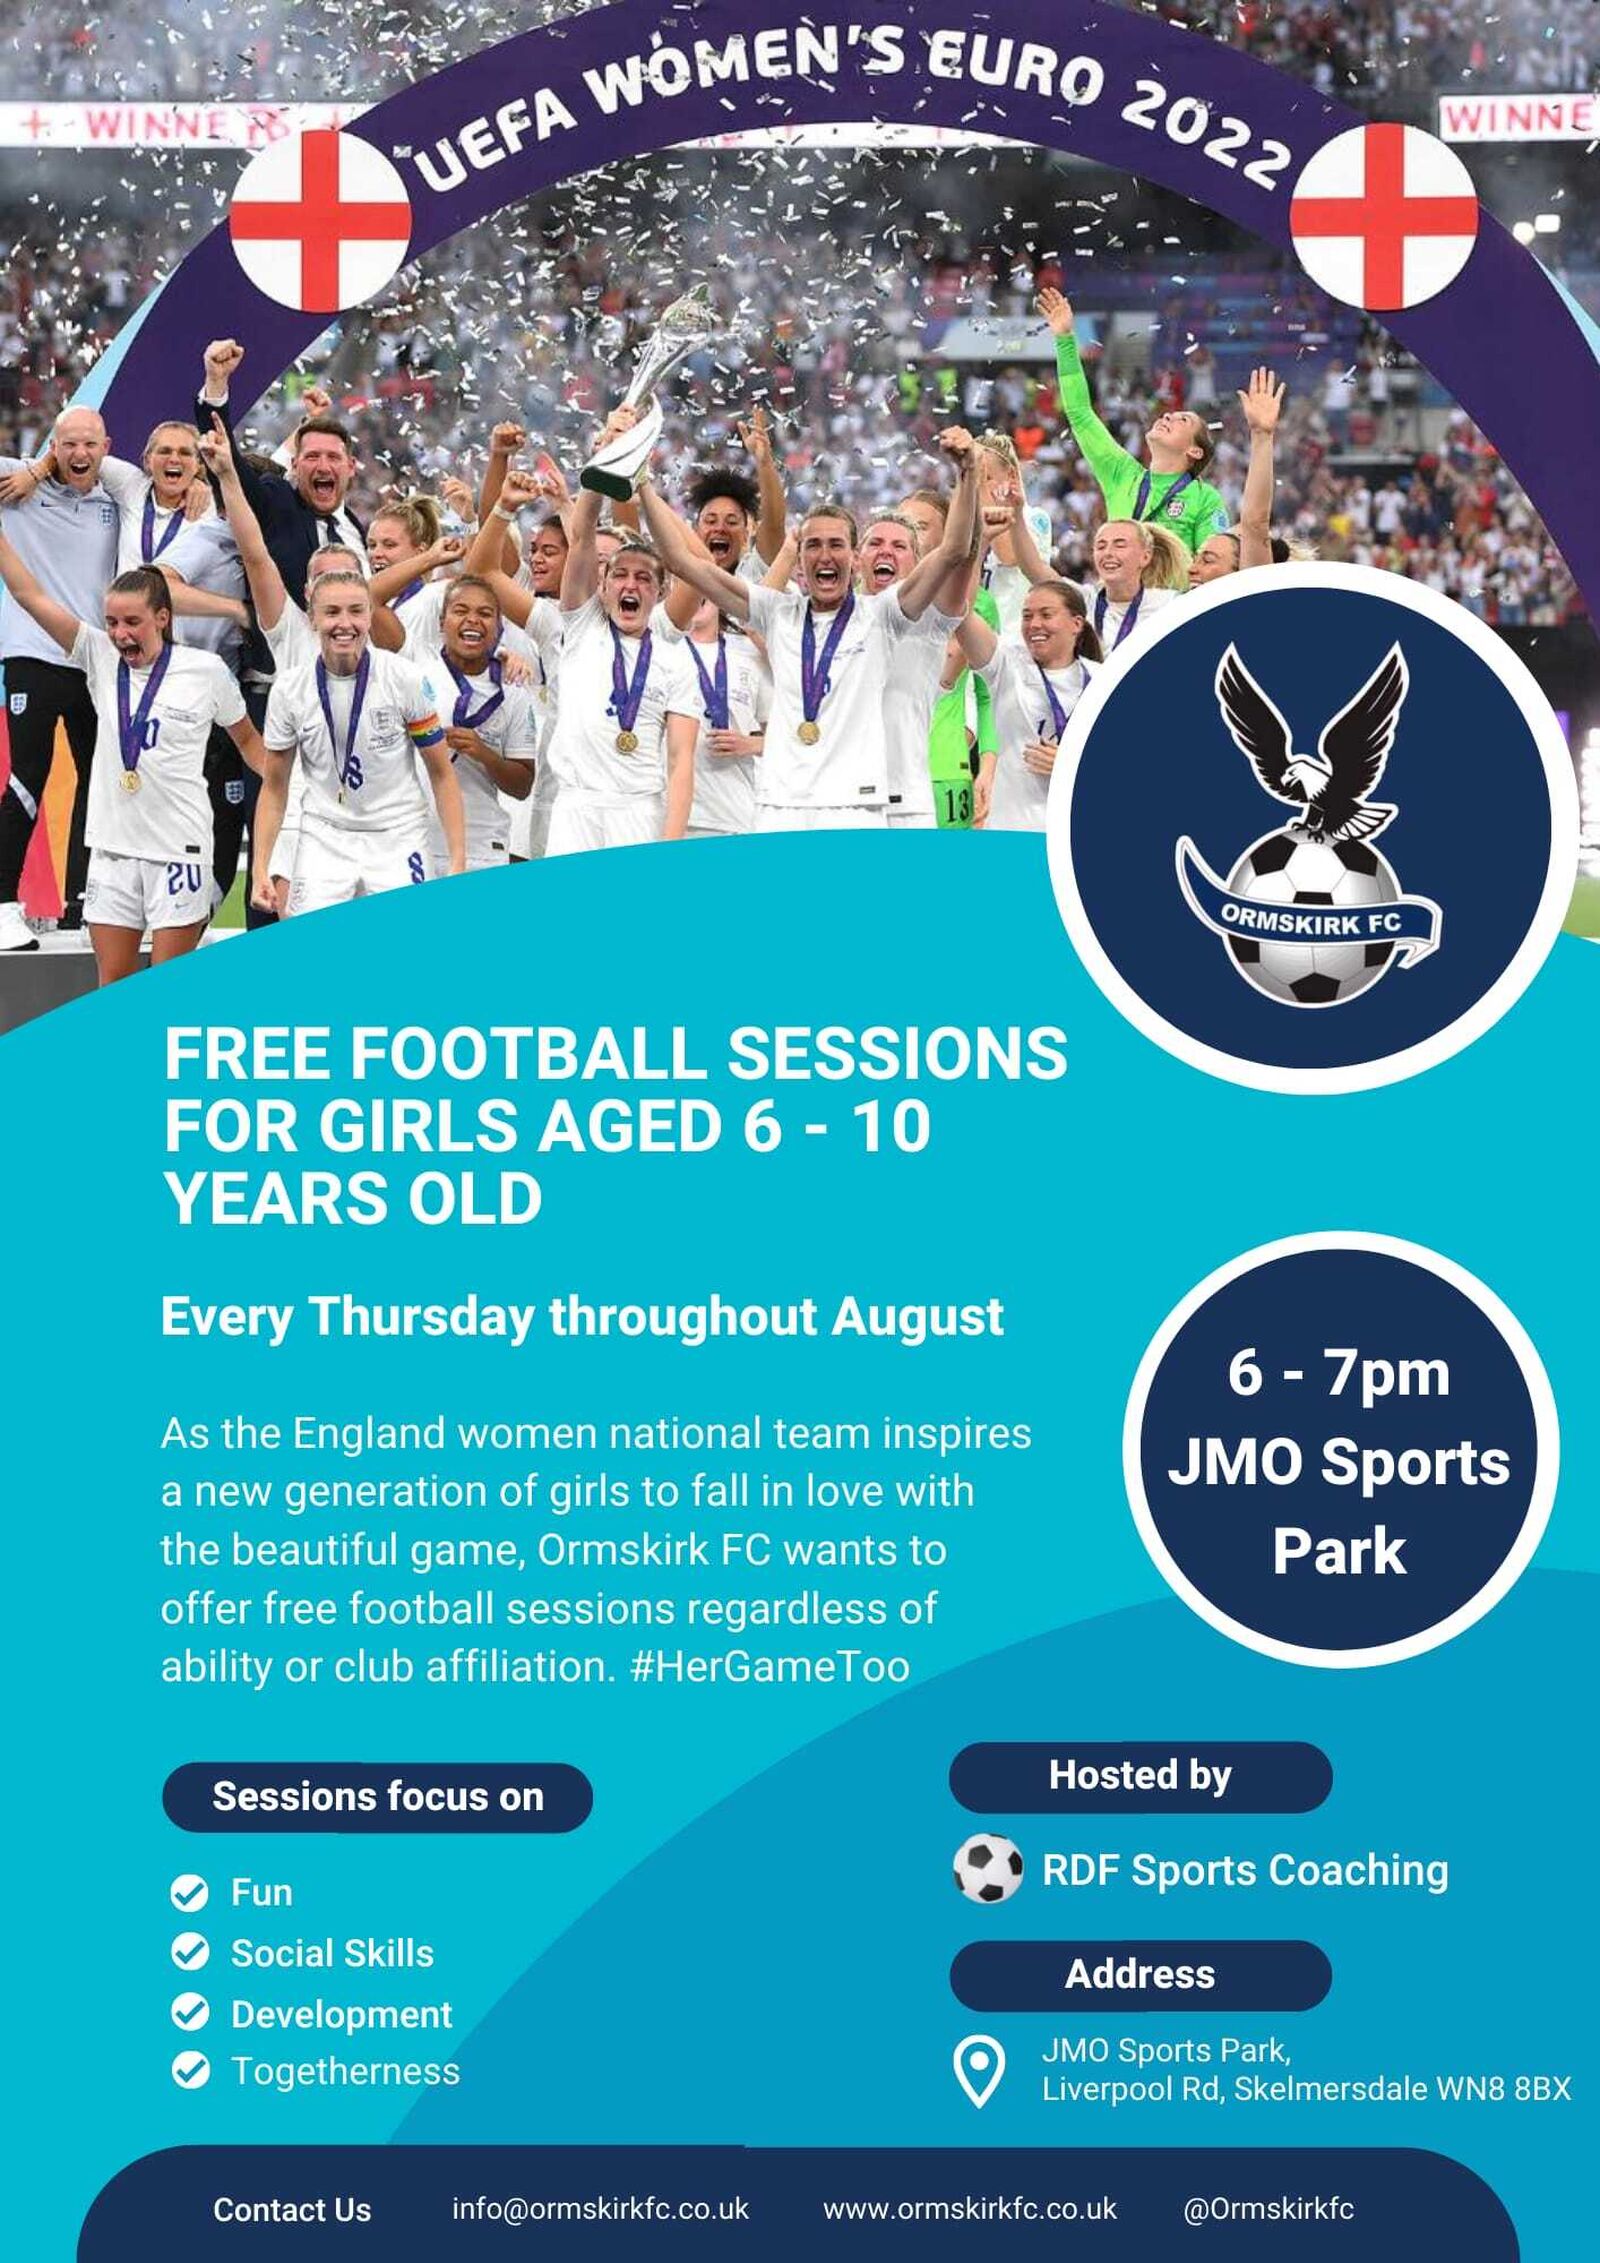 Free Football Sessions for Girls Aged 6-10 years old